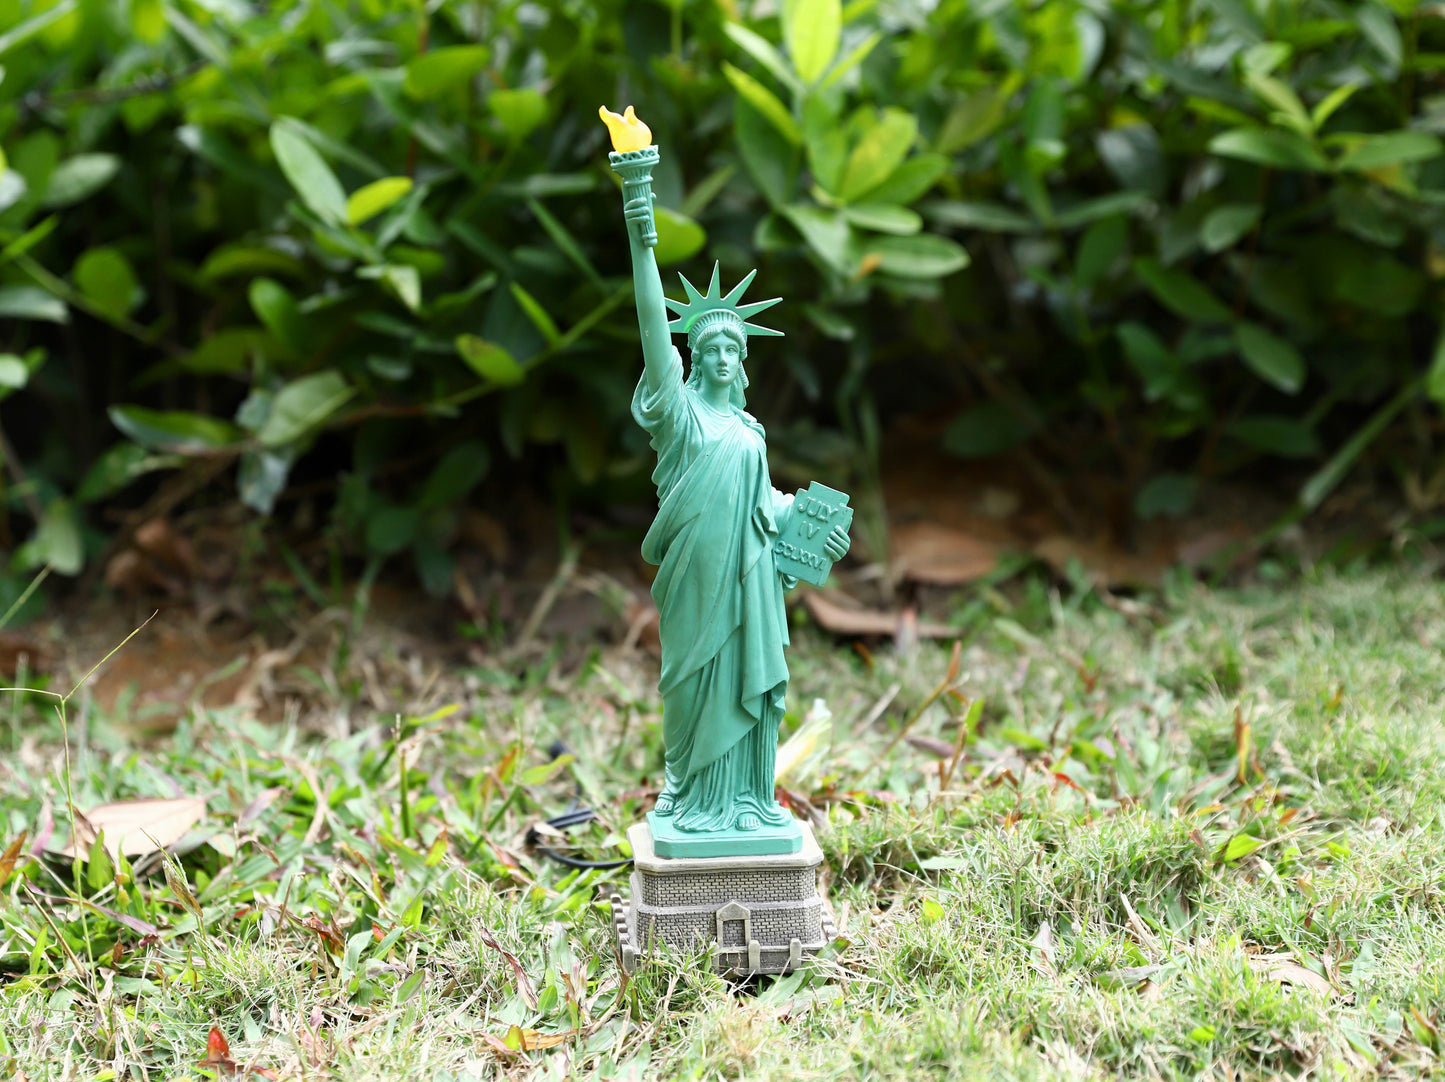 Statue of Liberty with High-Power Solar Spotlight